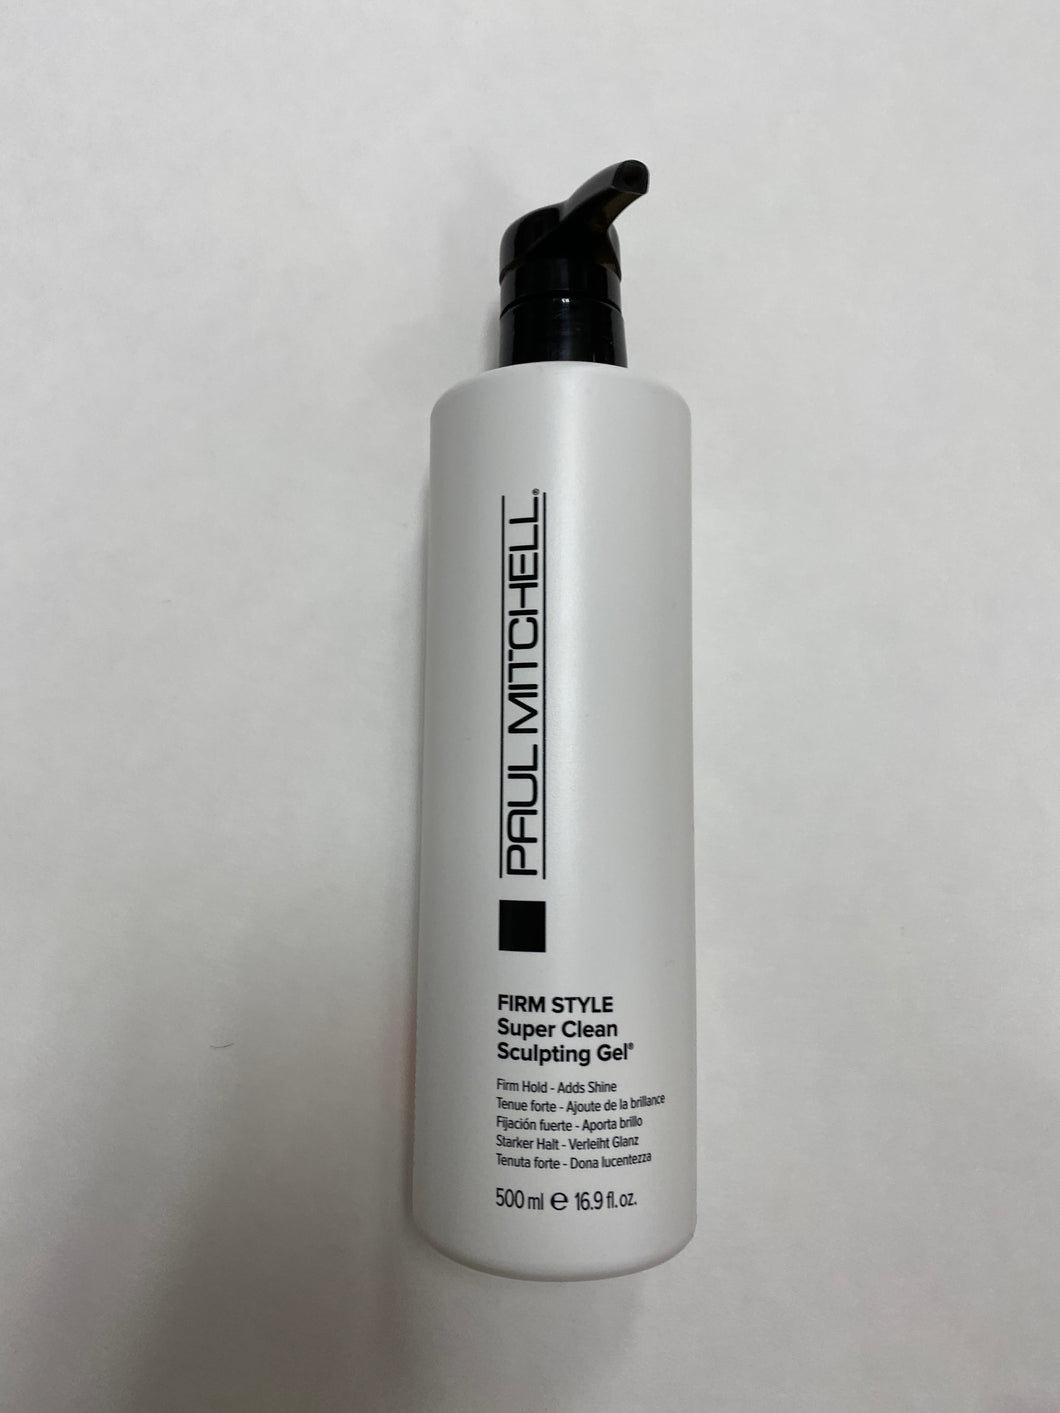 Paul Mitchell Firm Style Super Clean Sculpting gel